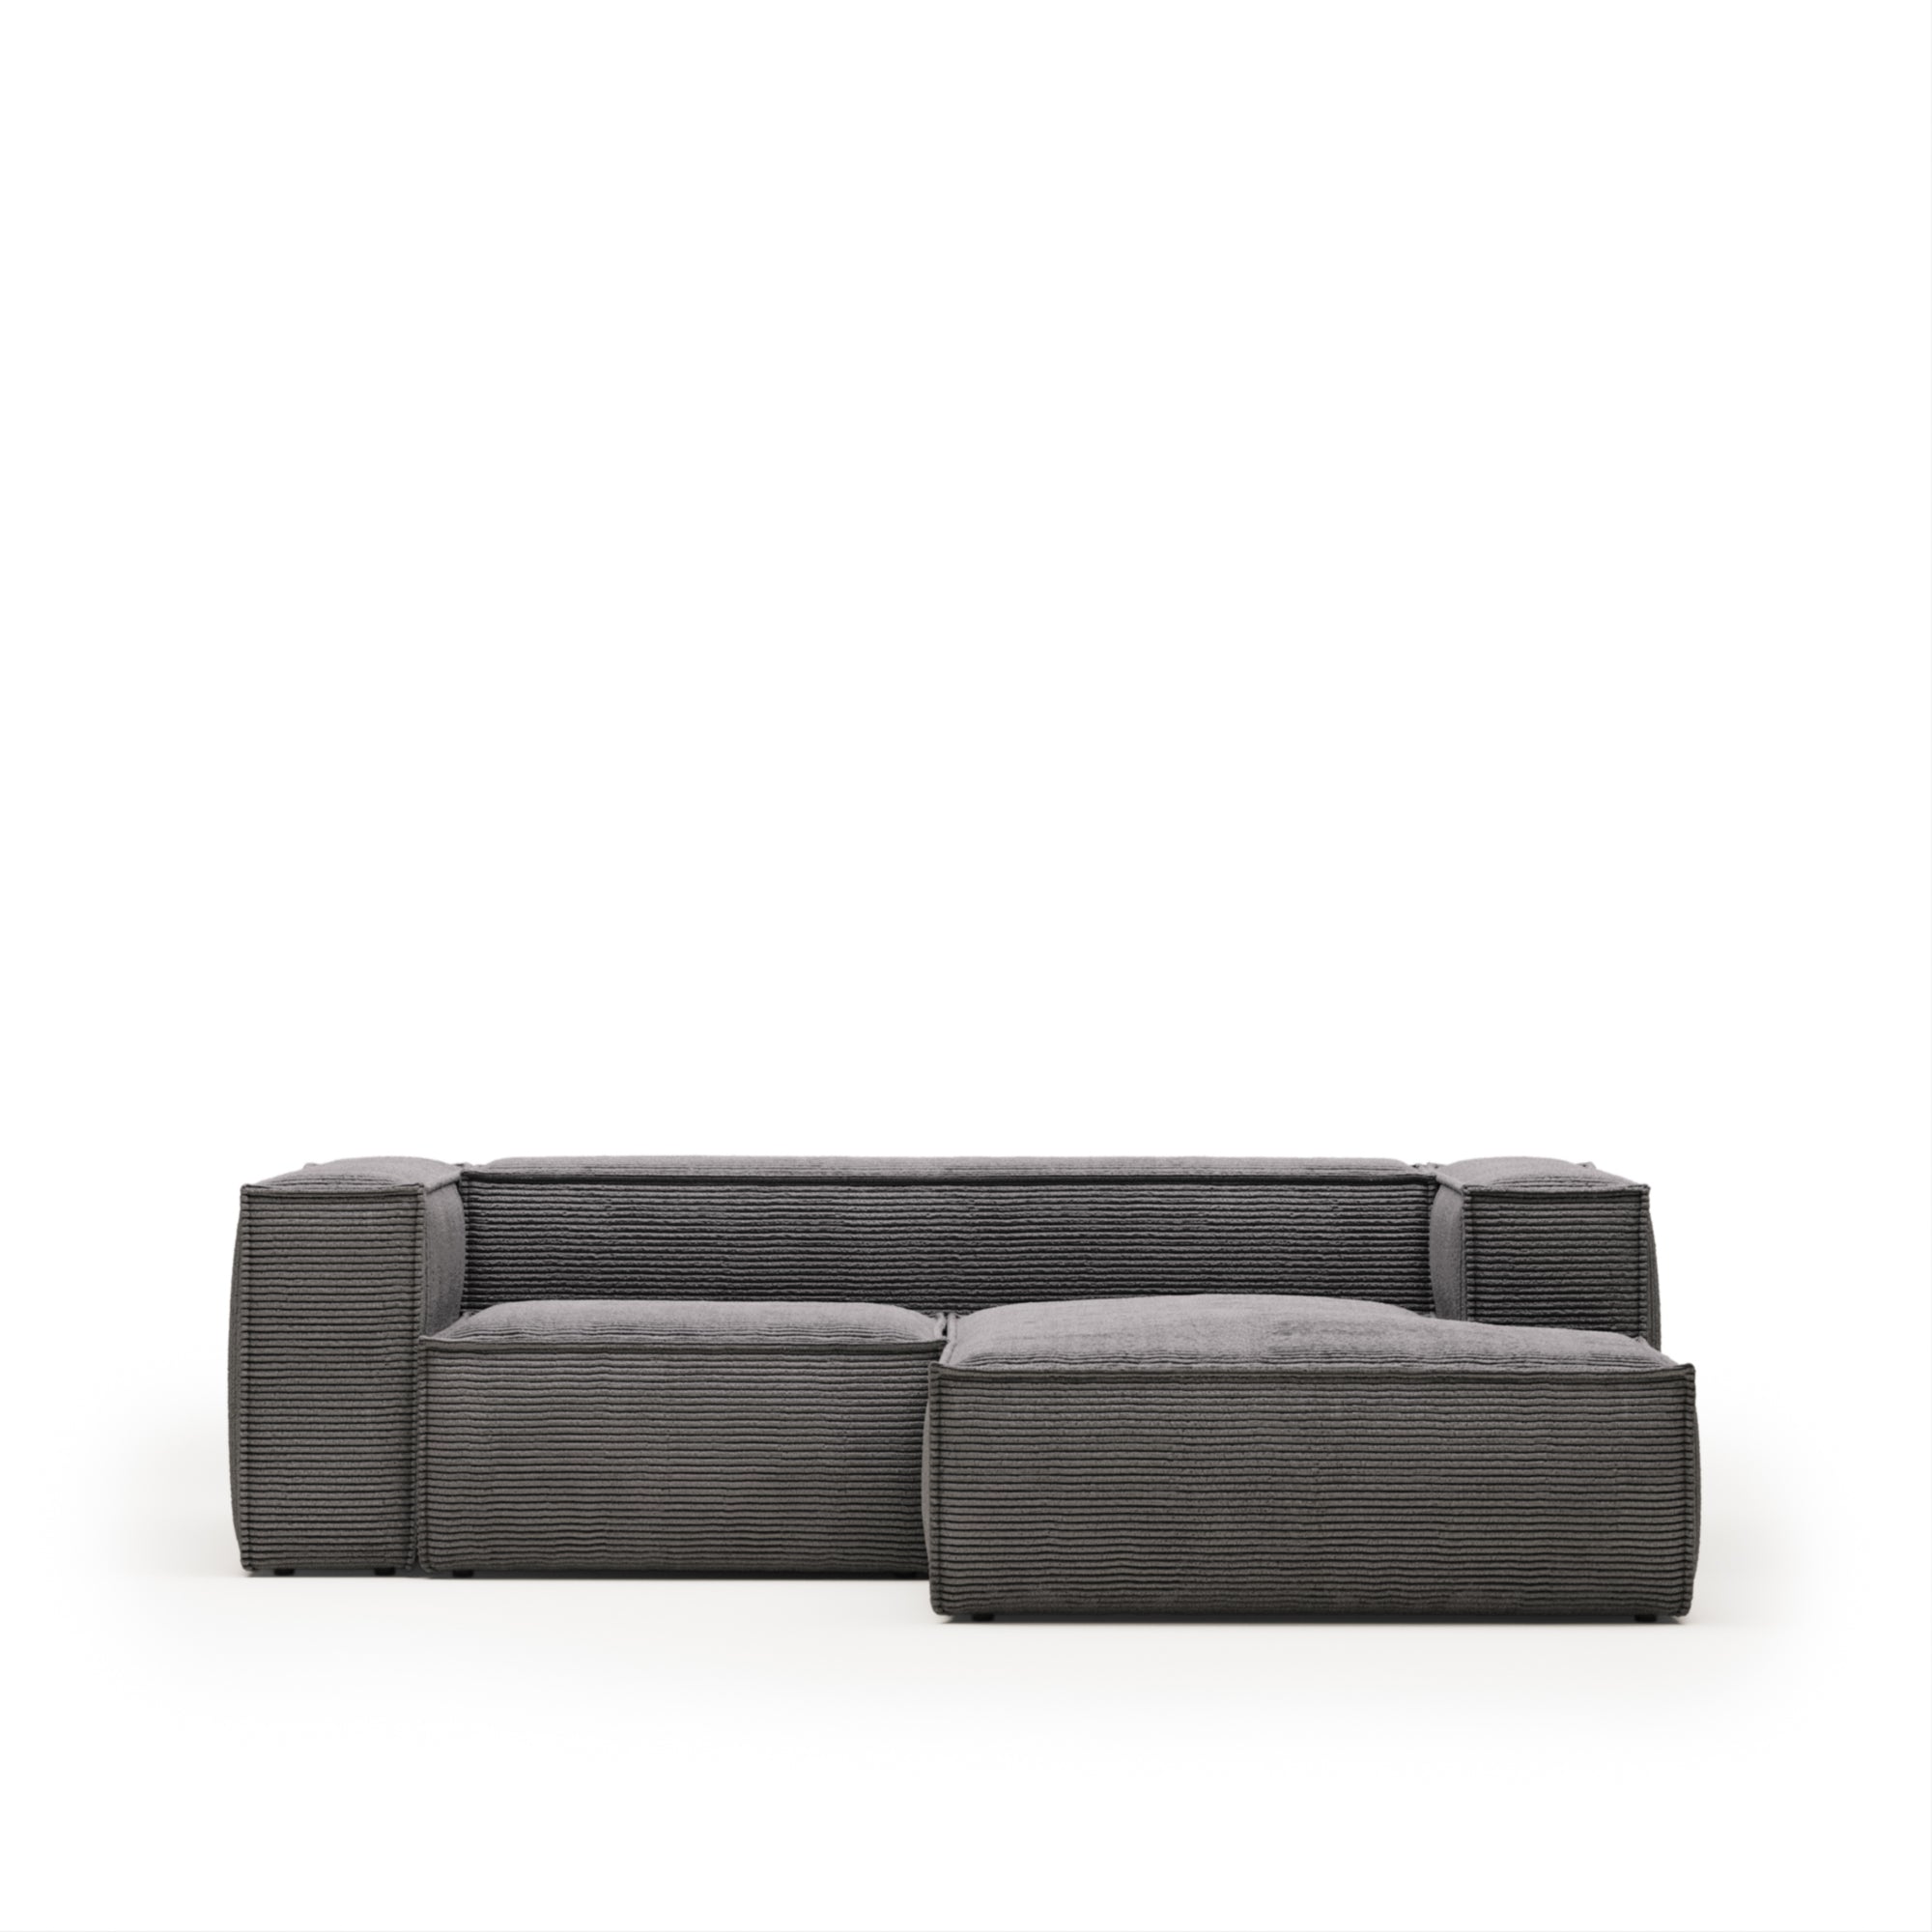 Blok 2 seater sofa with right side chaise longue in grey wide seam corduroy, 240 cm